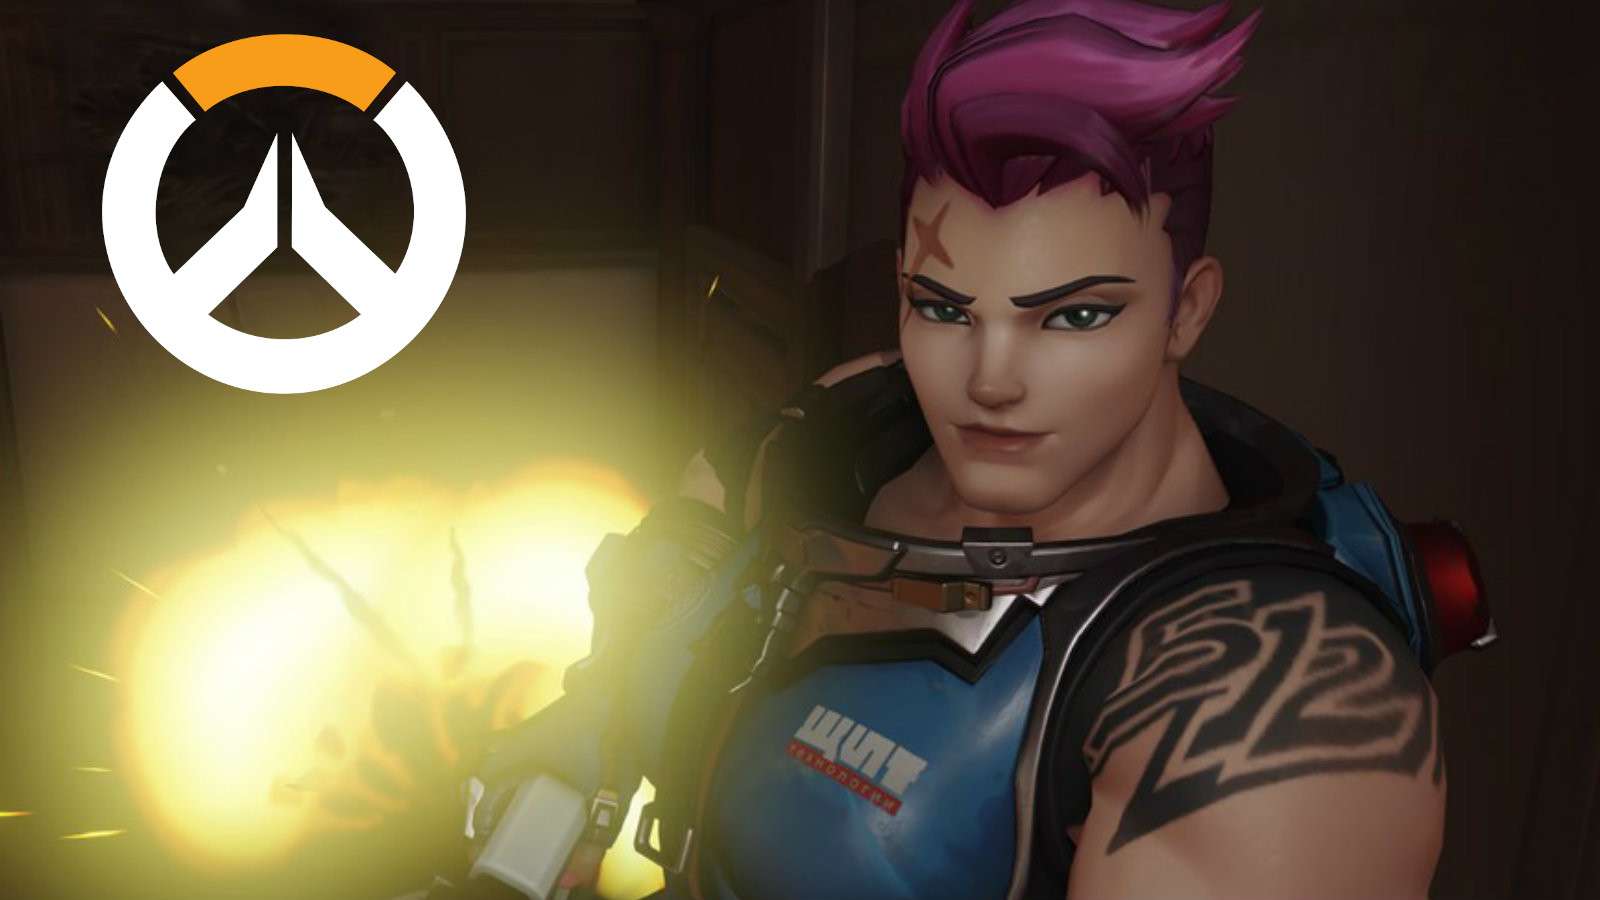 Zarya from Overwatch grins as an explosion happens behind her